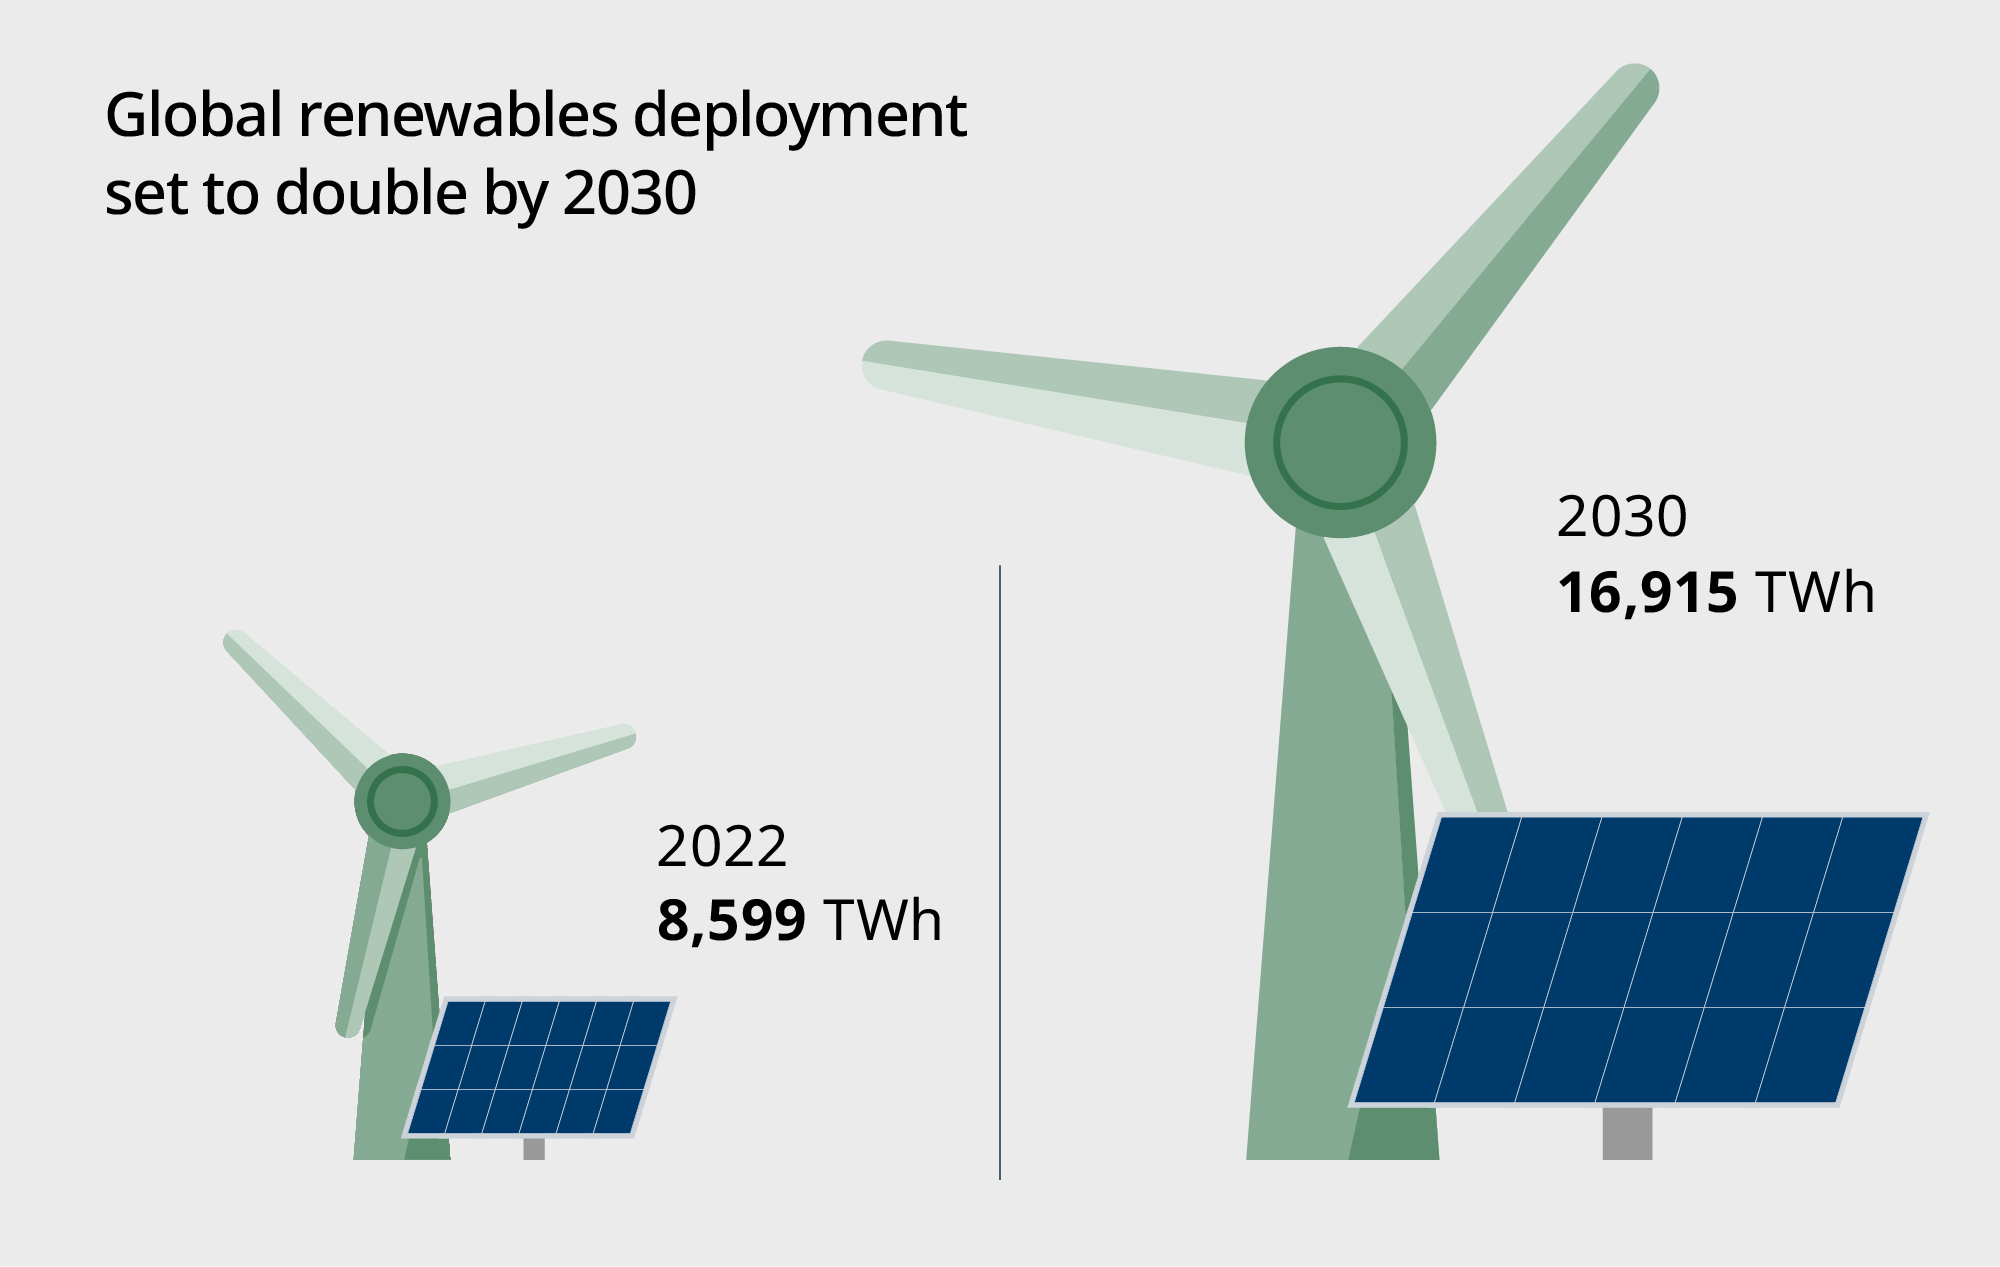 Global renewables deployment set to doble by 2030 